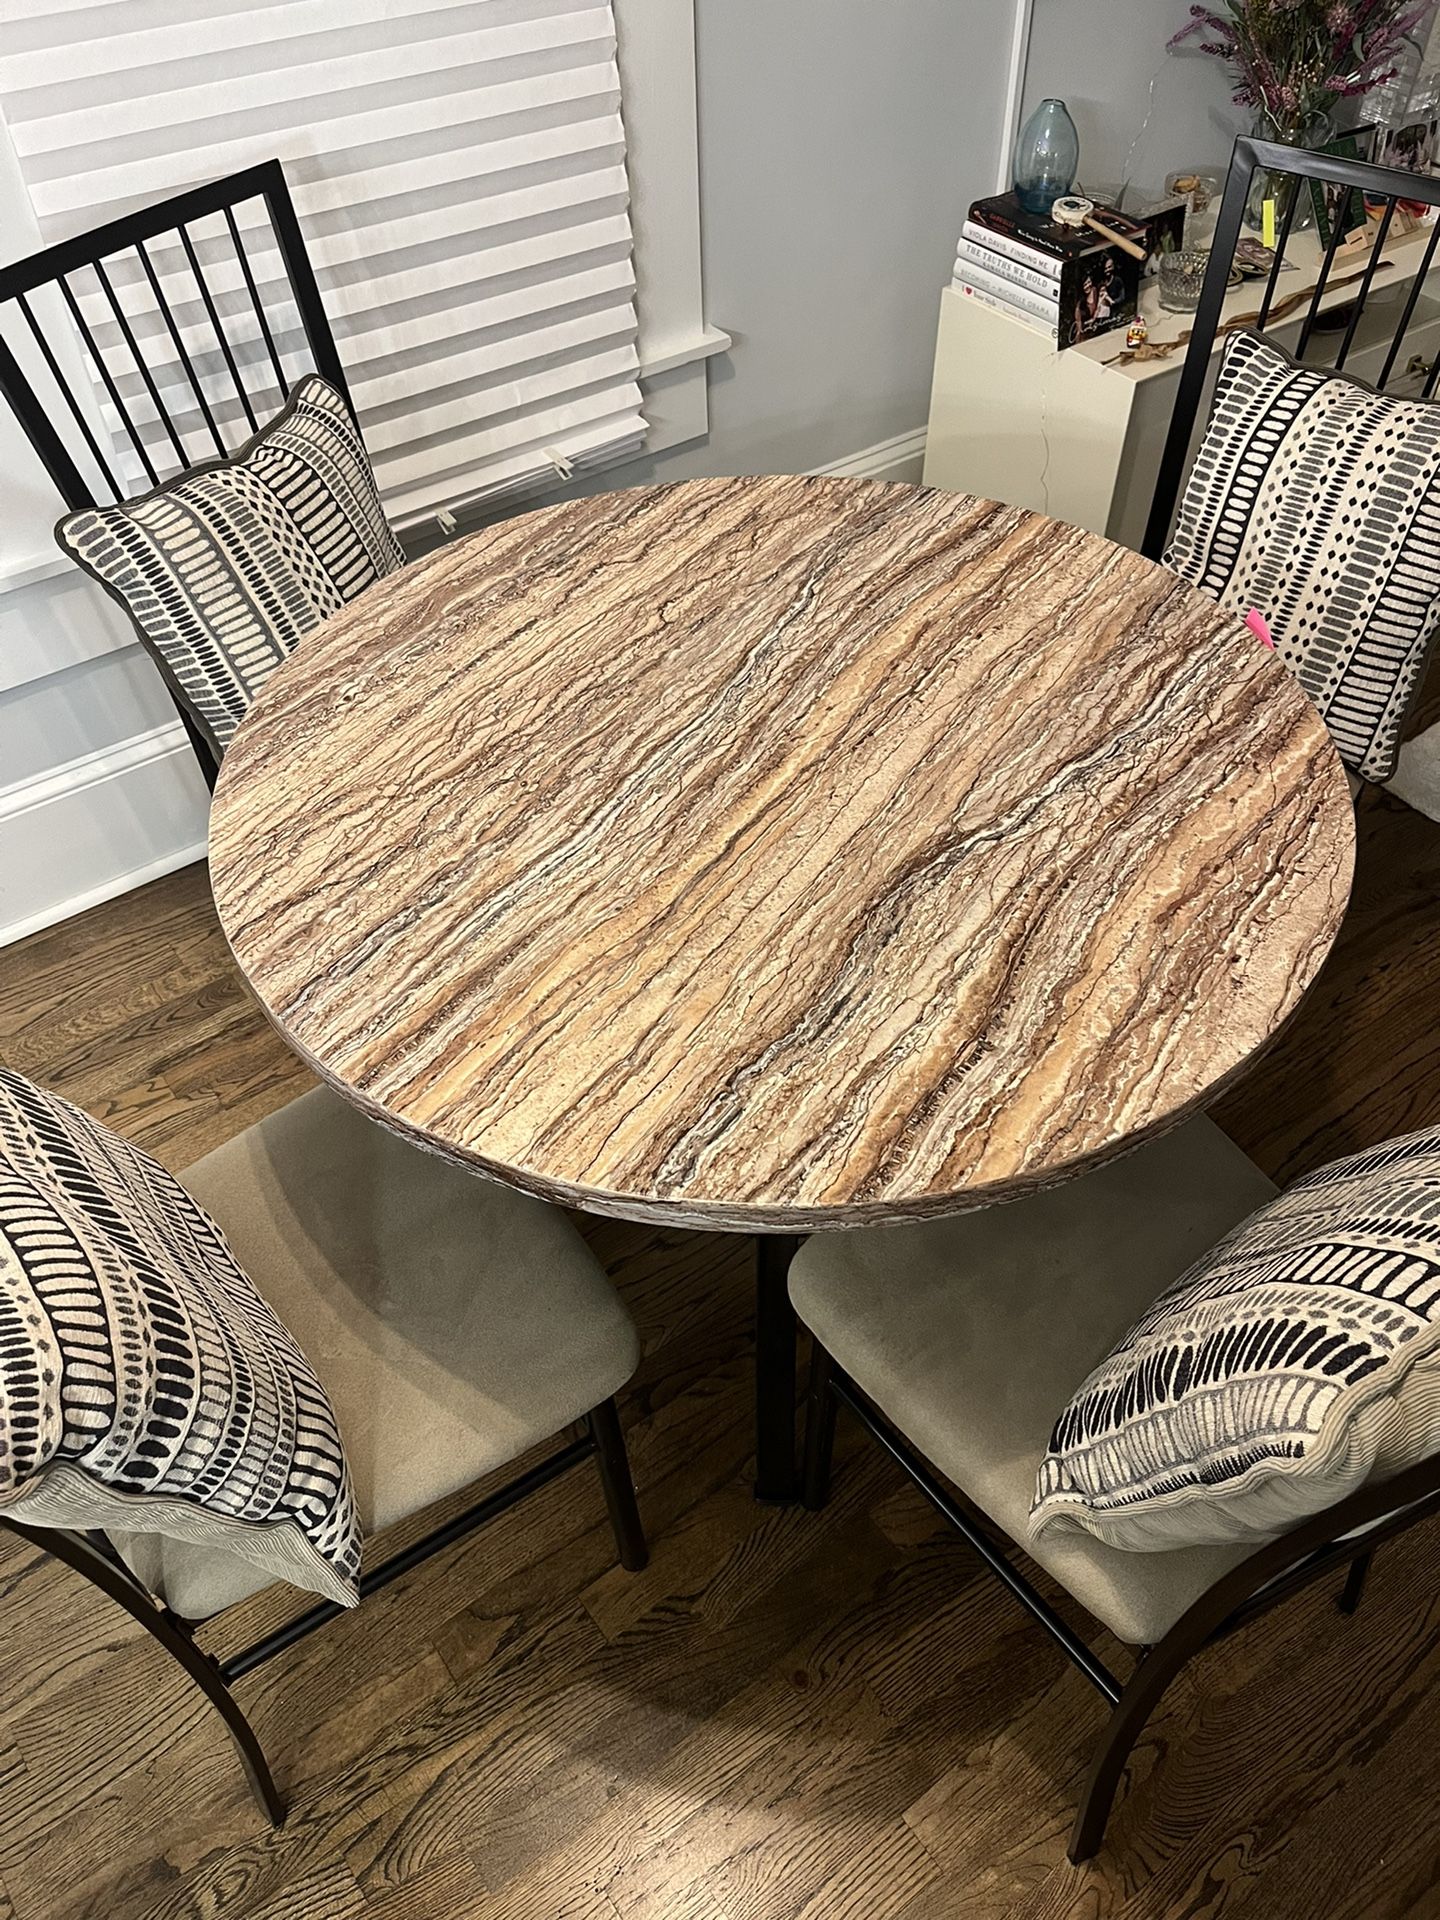 Round Dining Table Set With 4 Chairs And Pillows 